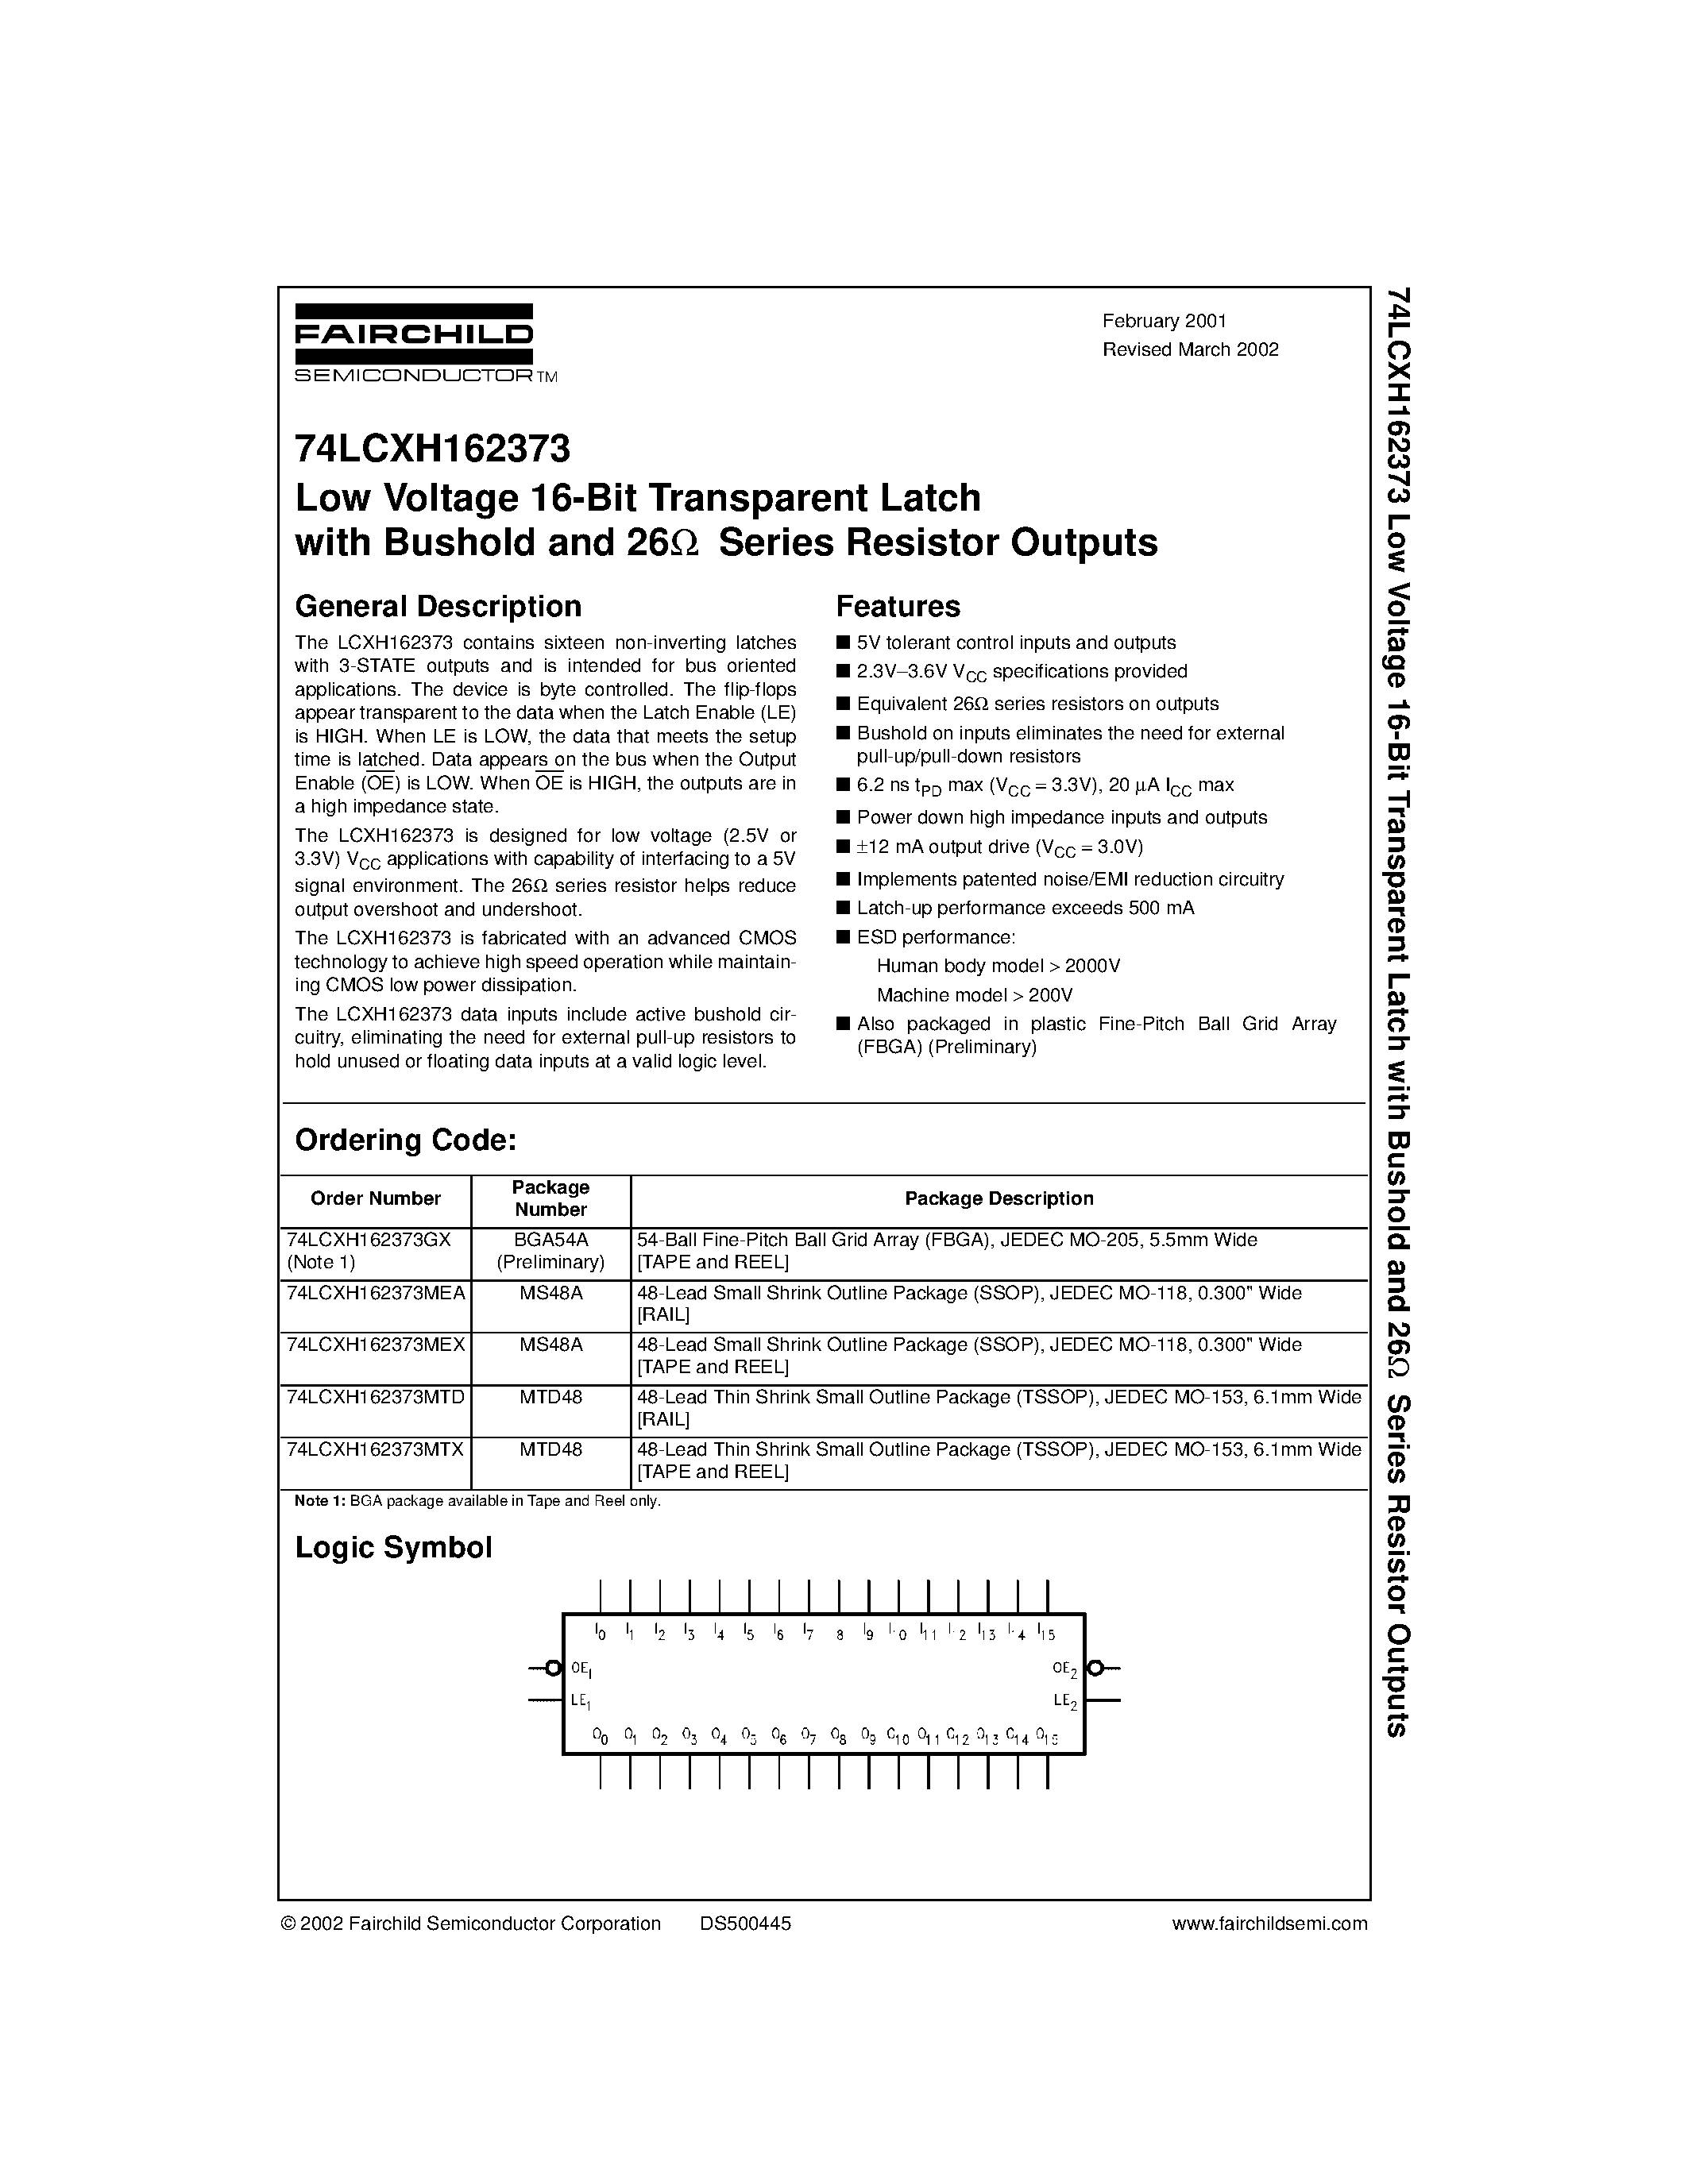 Datasheet 74LCXH162373MTD - Low Voltage 16-Bit Transparent Latch with Bushold and 26 Series Resistor Outputs page 1